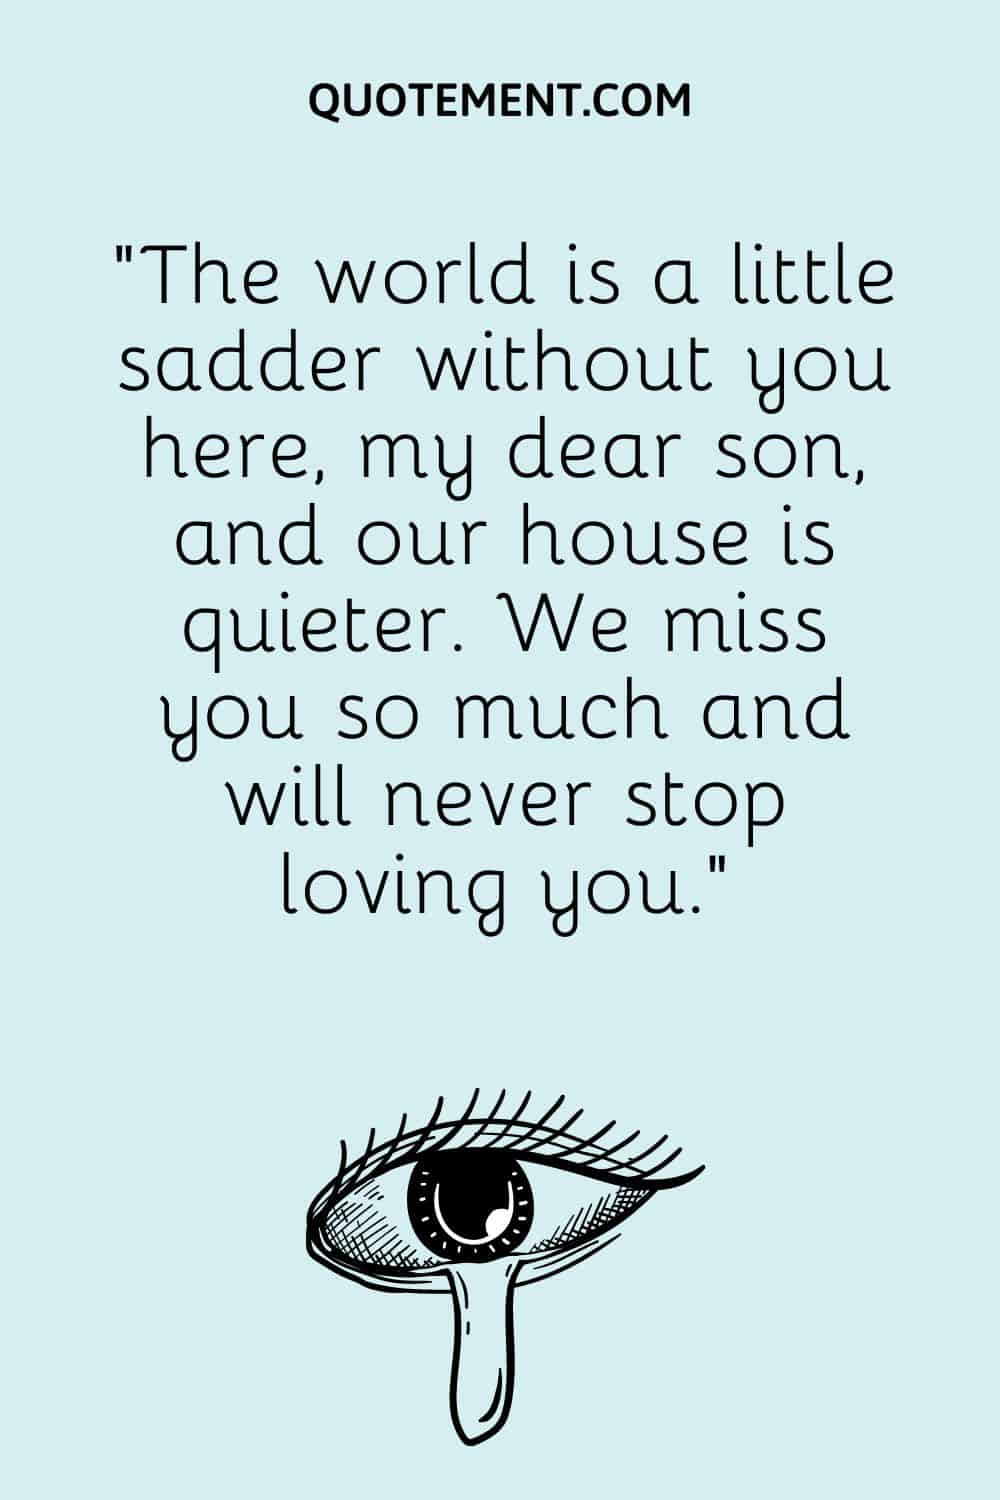 “The world is a little sadder without you here, my dear son, and our house is quieter. We miss you so much and will never stop loving you.”